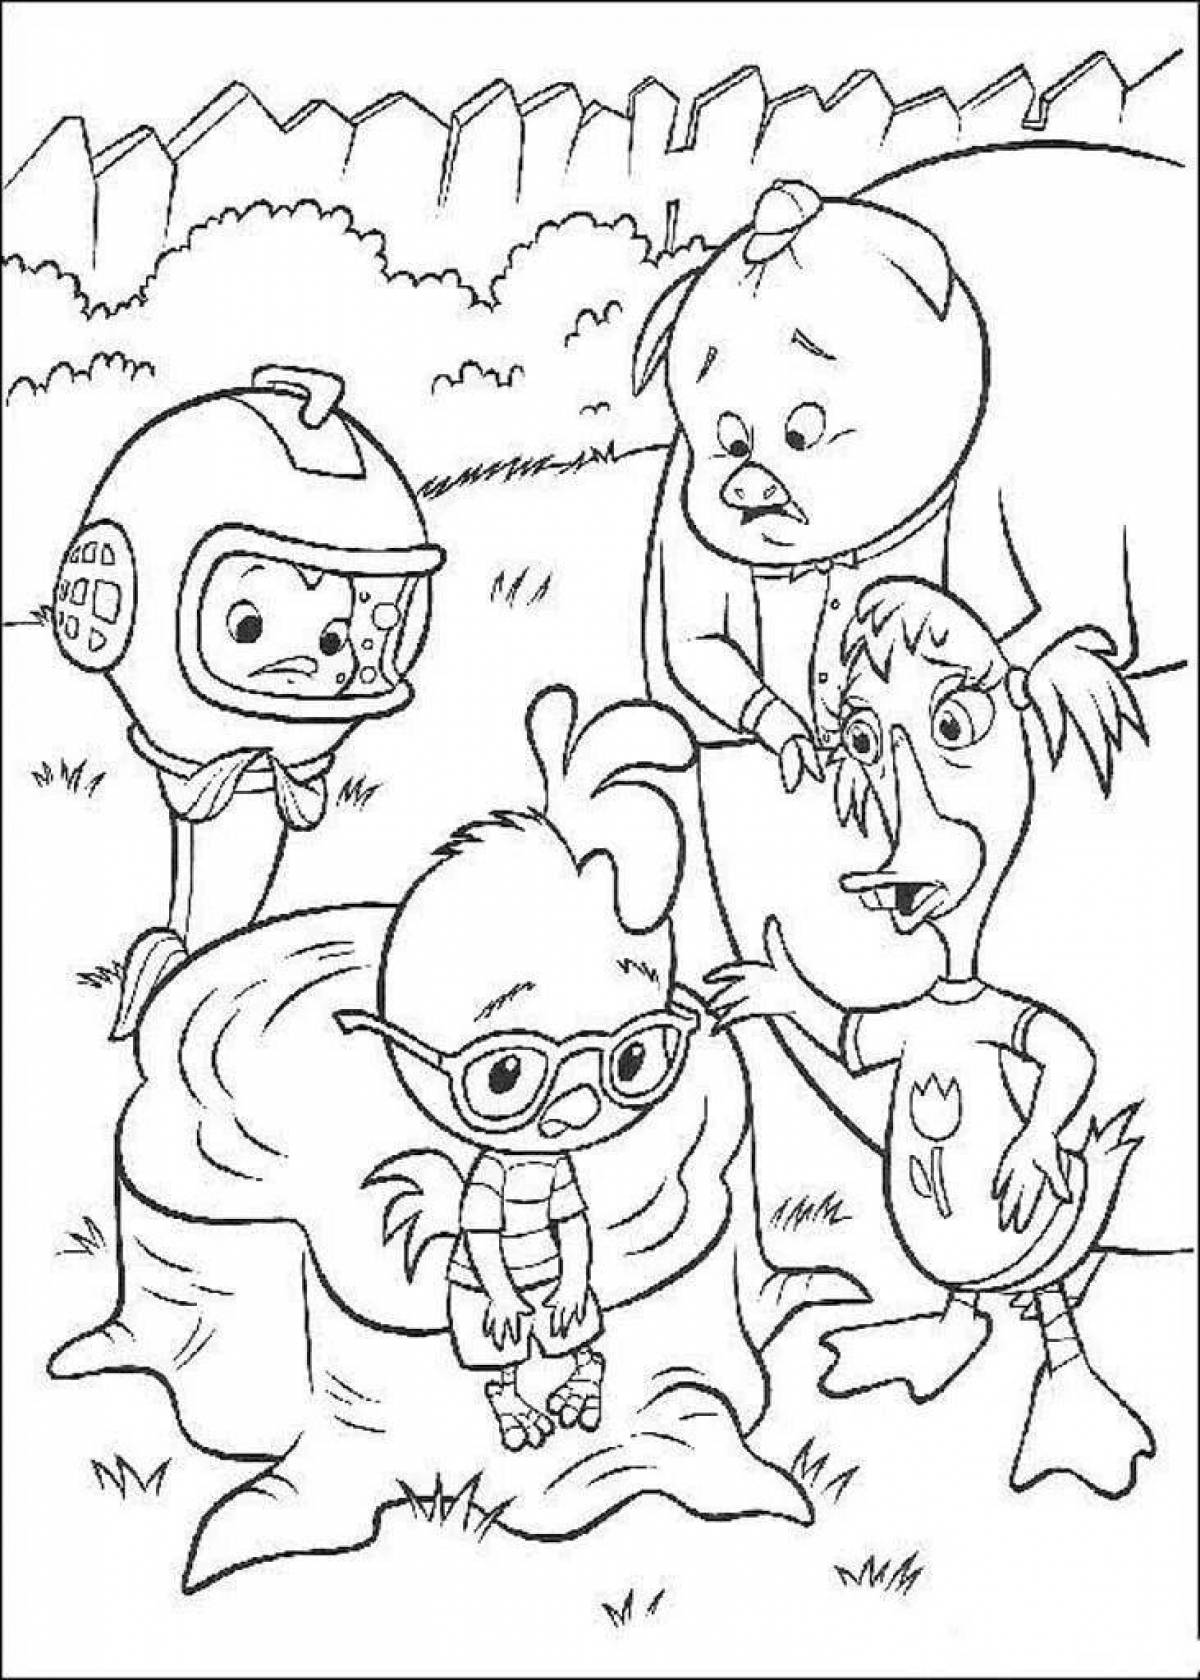 Grinning chick coloring page